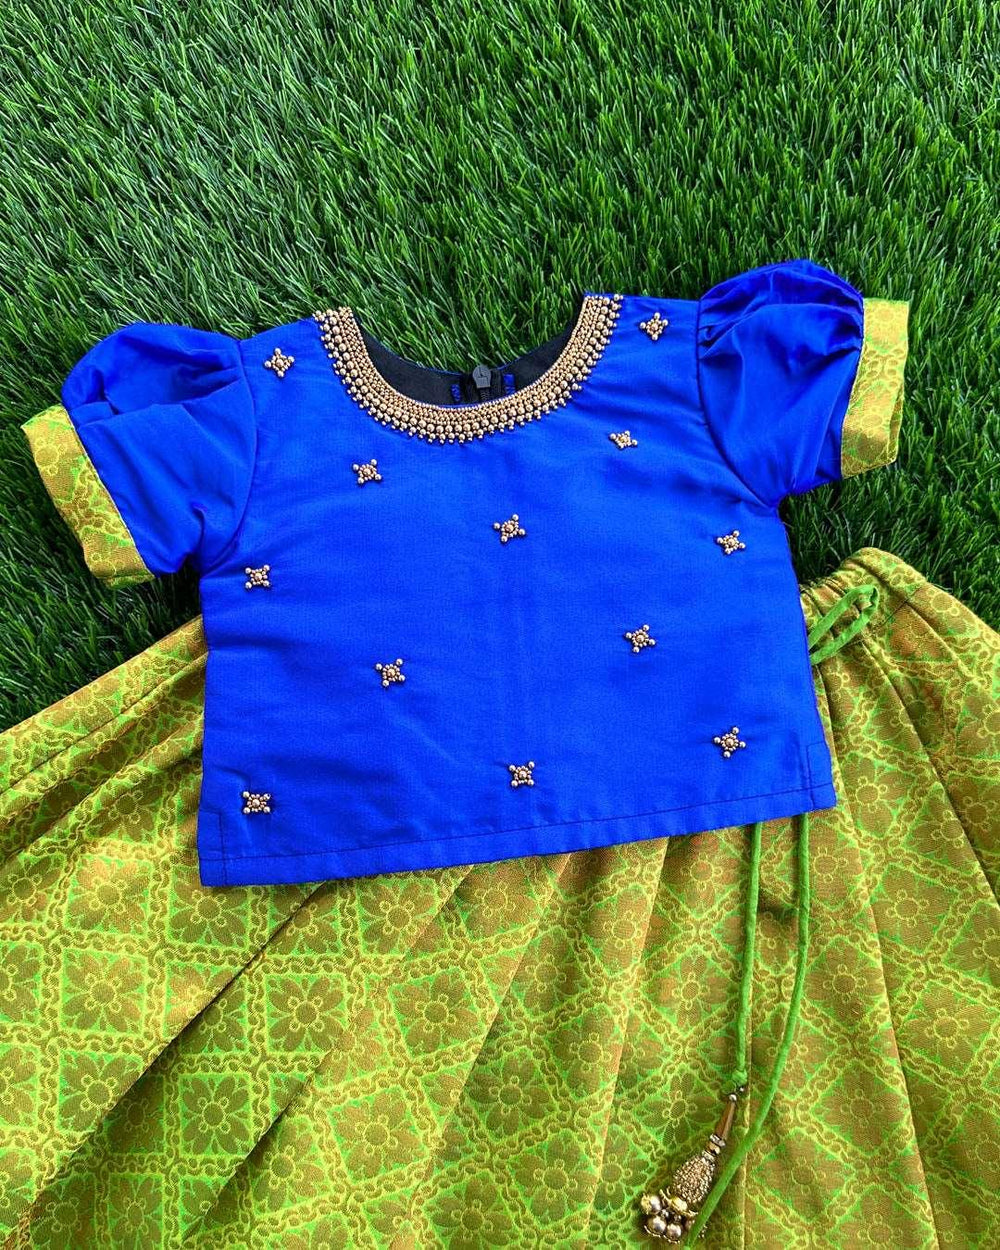 Lime Green & Royalblue Combo Handwork Traditional Silk Lehenga Choli
Skirt : Lime Green shade handloom silk fabric with self wooven jaquard work. Inner portion of the skirt is covered with white colour soft cotton fabric. Center poti